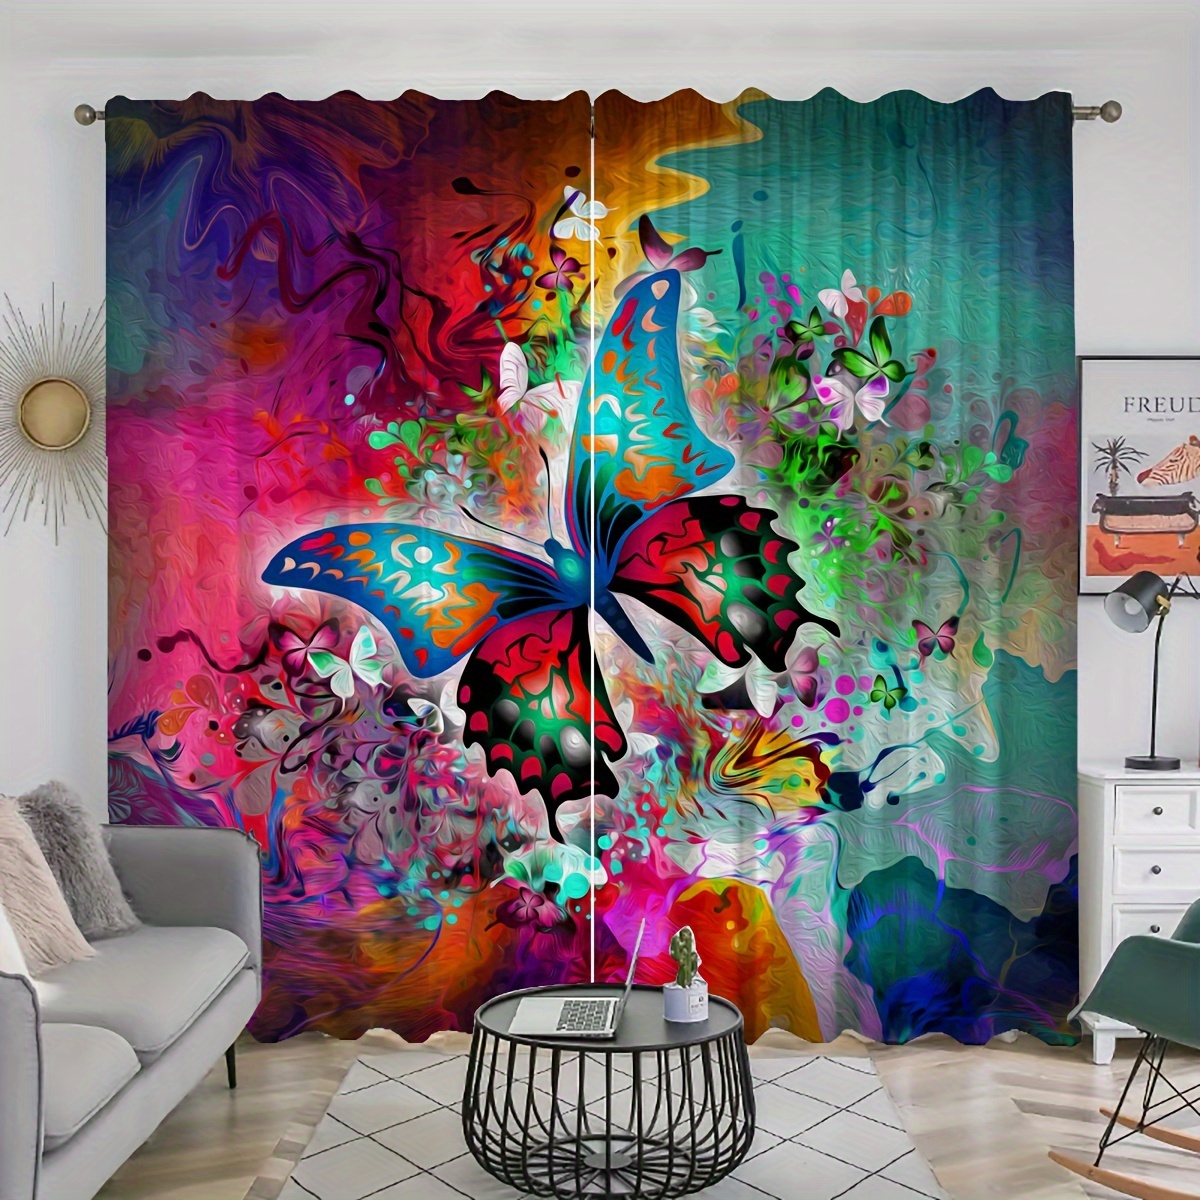 

2pcs, Colorful Butterfly Printed Curtains, Rod Pocket Curtain, Suitable For Restaurants, Public Places, Living Rooms, Bedrooms, Offices, Study Rooms, Home Decoration